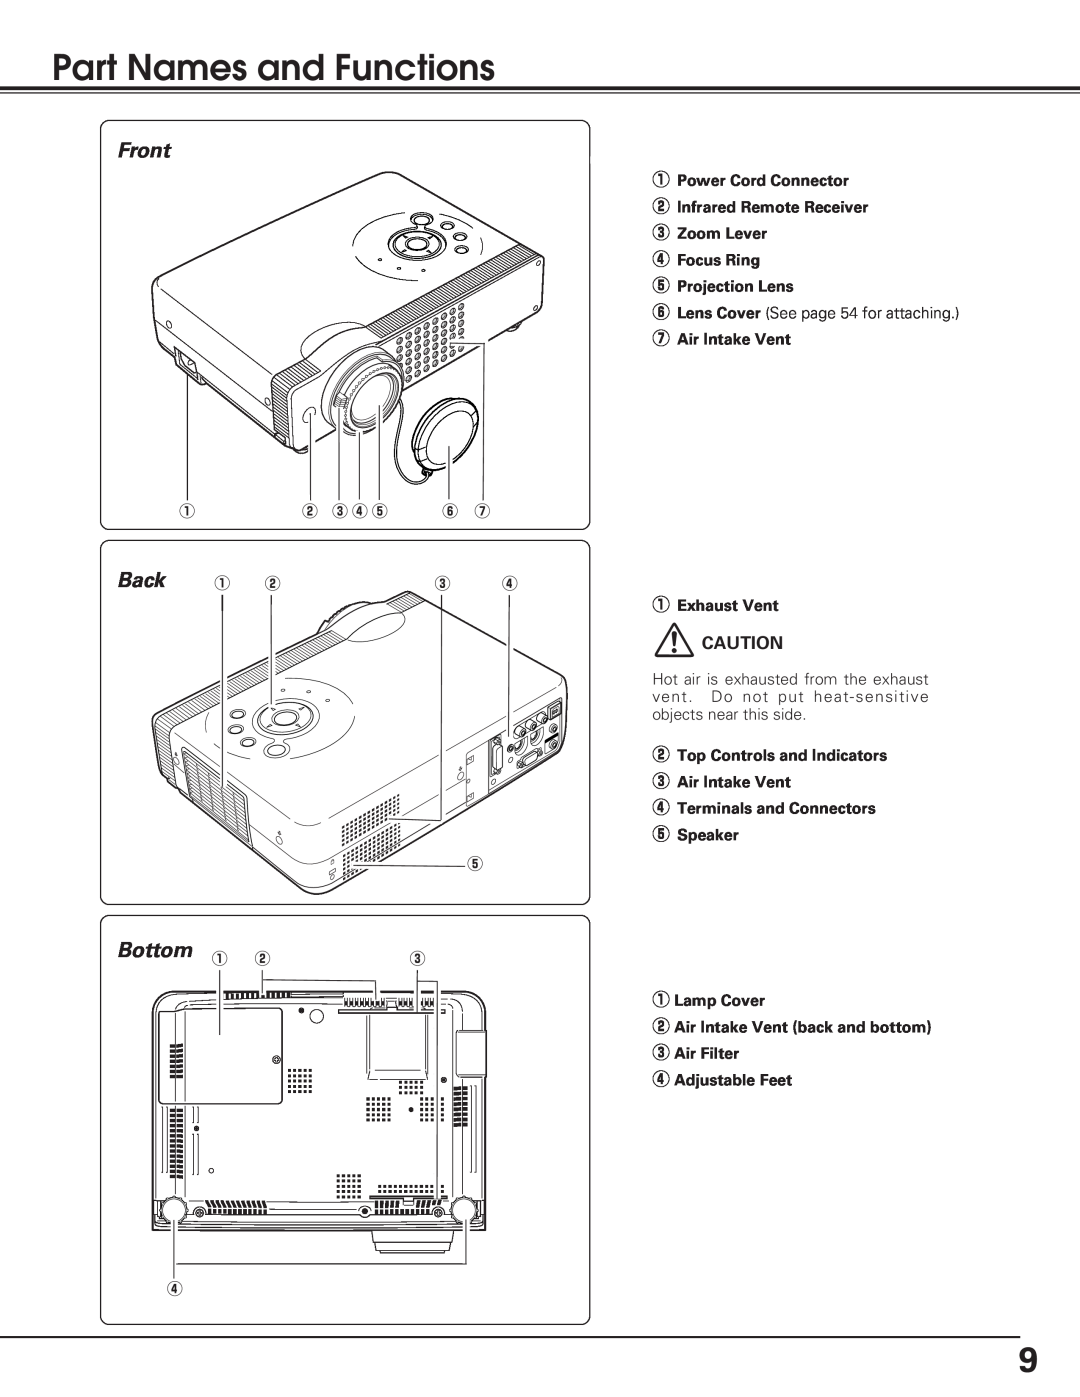 Sanyo PLC-SL20 owner manual Part Names and Functions, Front, Back, Bottom, r Focus Ring t Projection Lens, q Exhaust Vent 